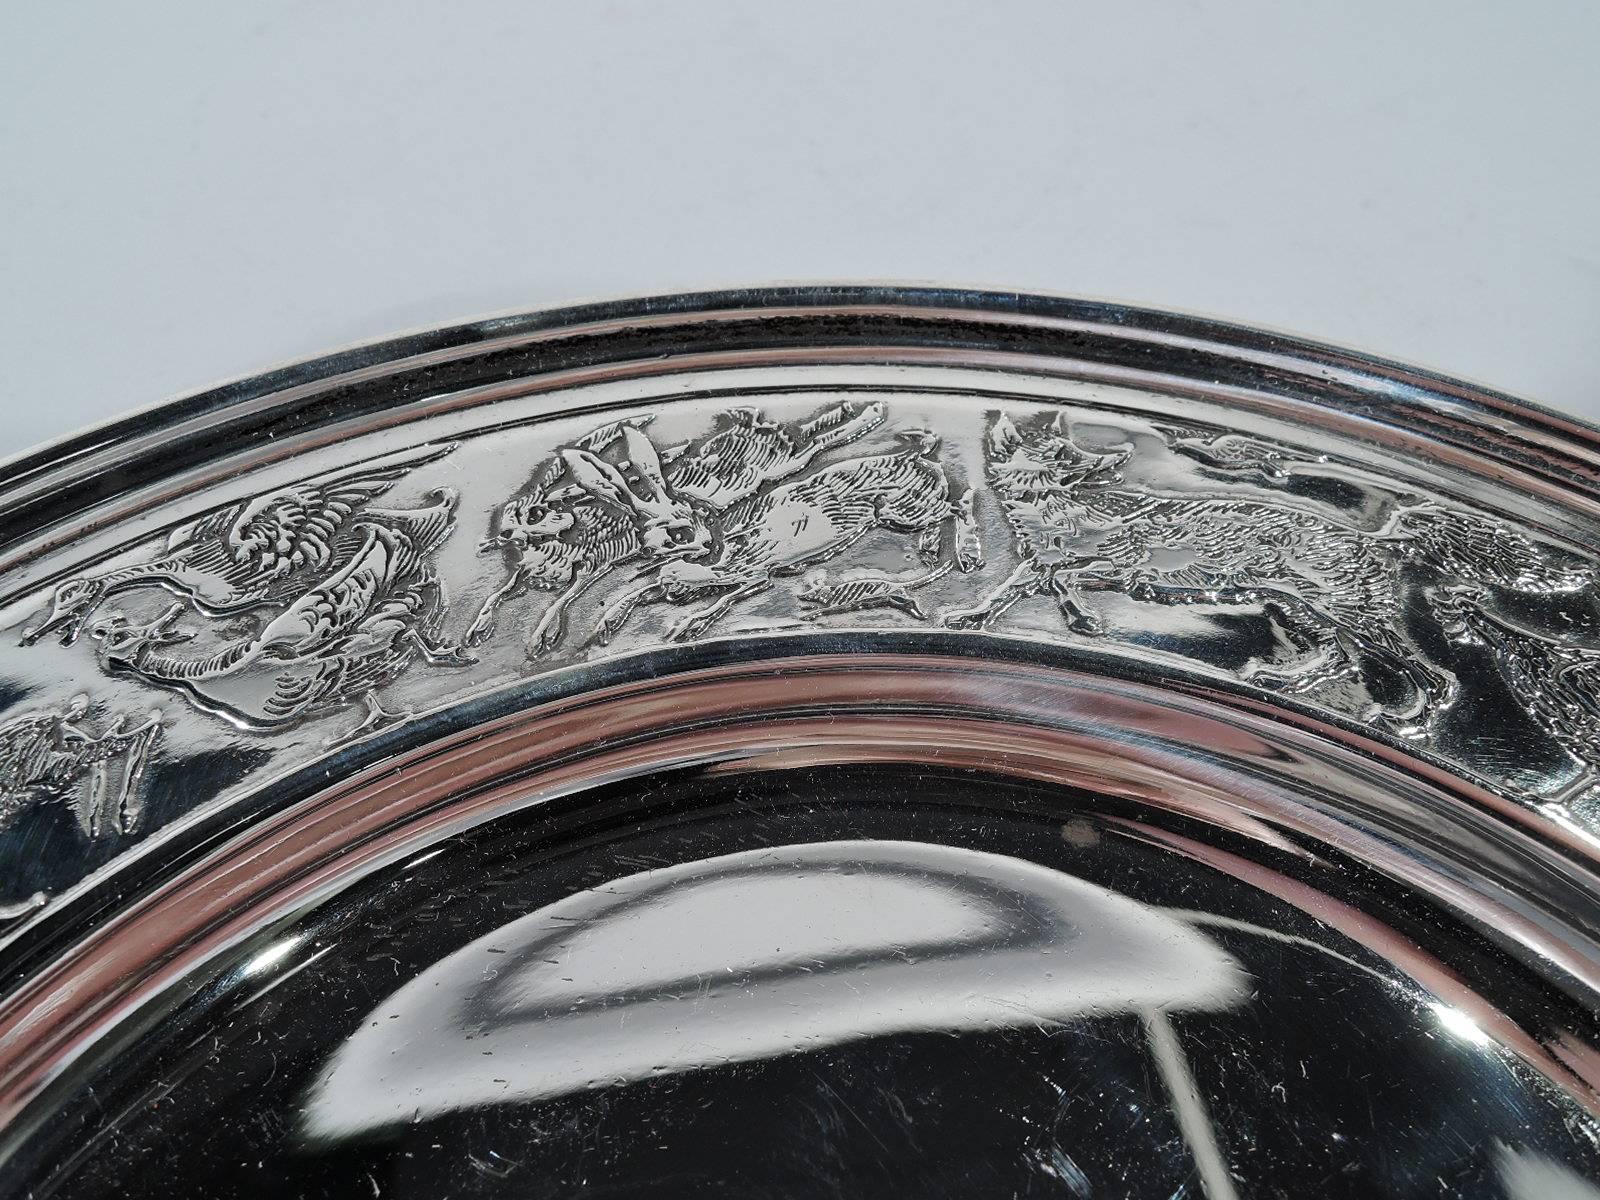 Edwardian sterling silver plate with Noah’s Ark theme. Made by William B. Kerr in Newark. Well plain. On shoulder are the animals – pigs, goats, bunnies, geese, and so on. A dense and lively frieze – less an orderly two-by-two procession than a